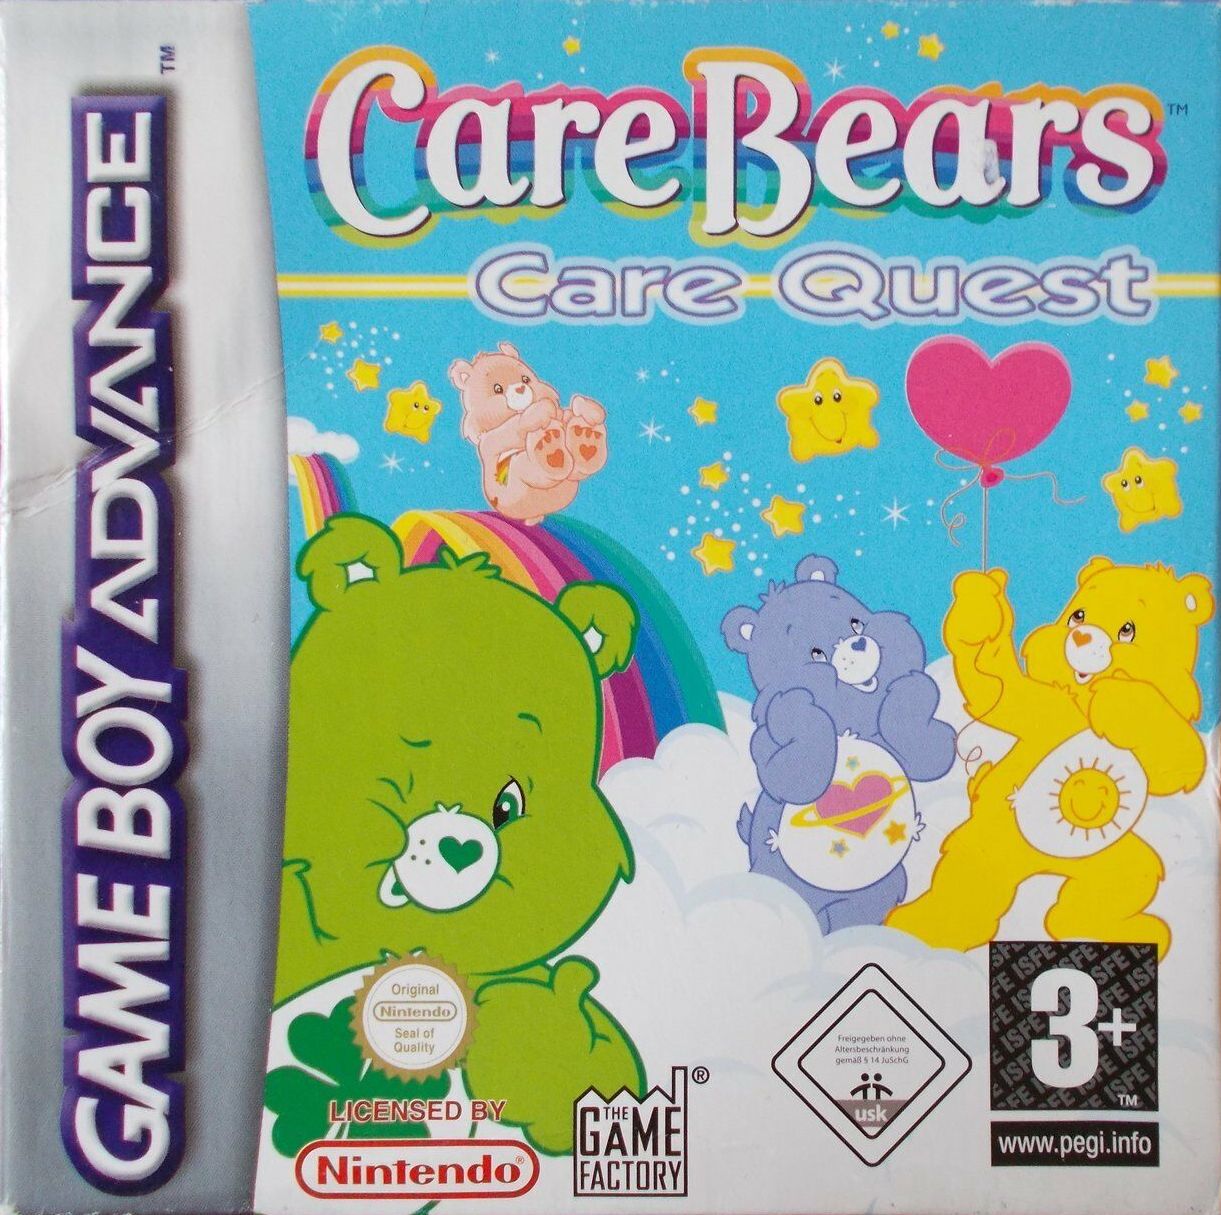 Care Bears - Care Quest